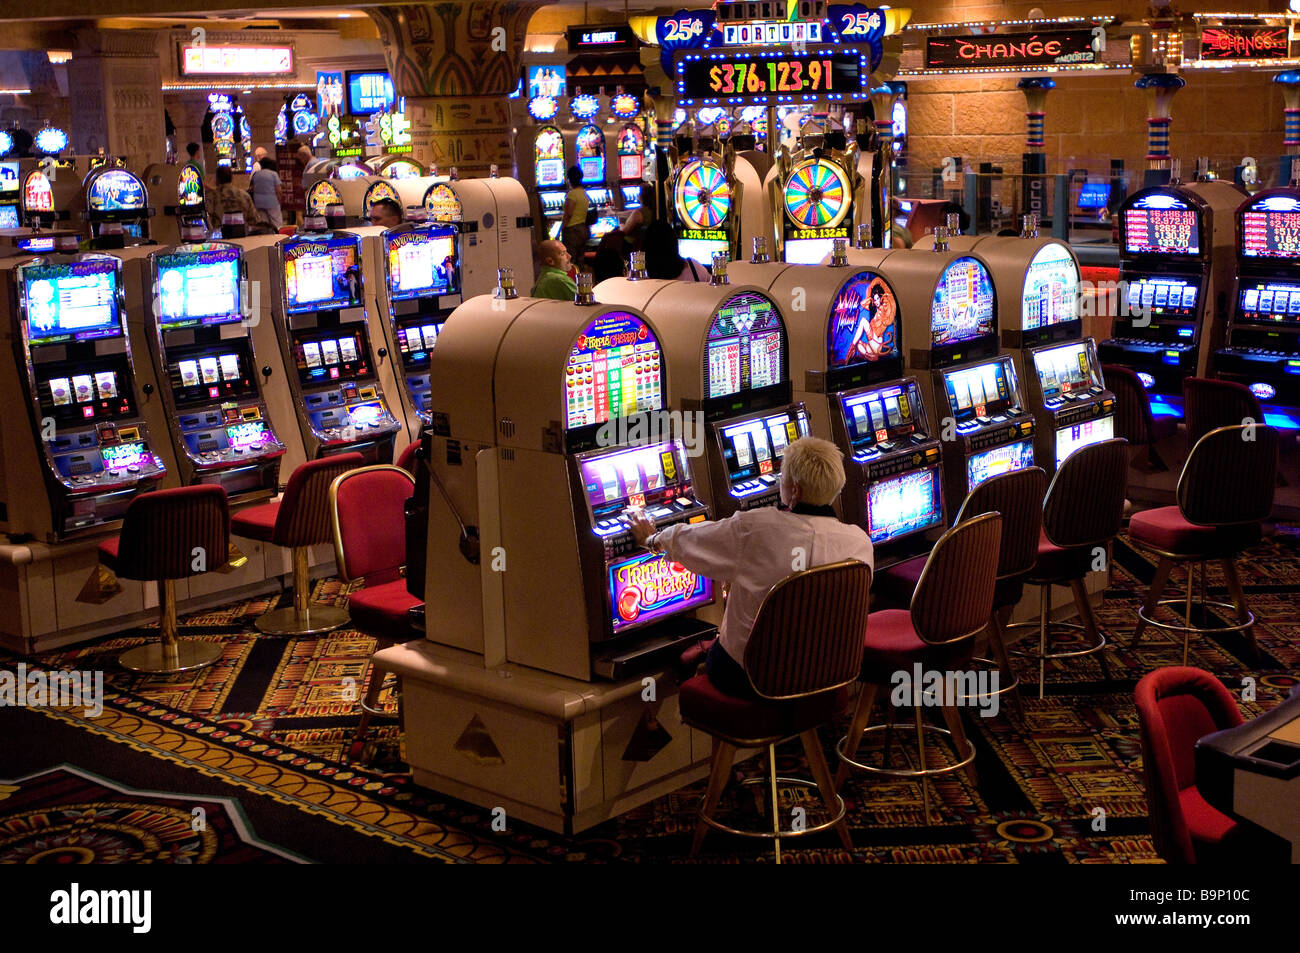 what states have slot machines